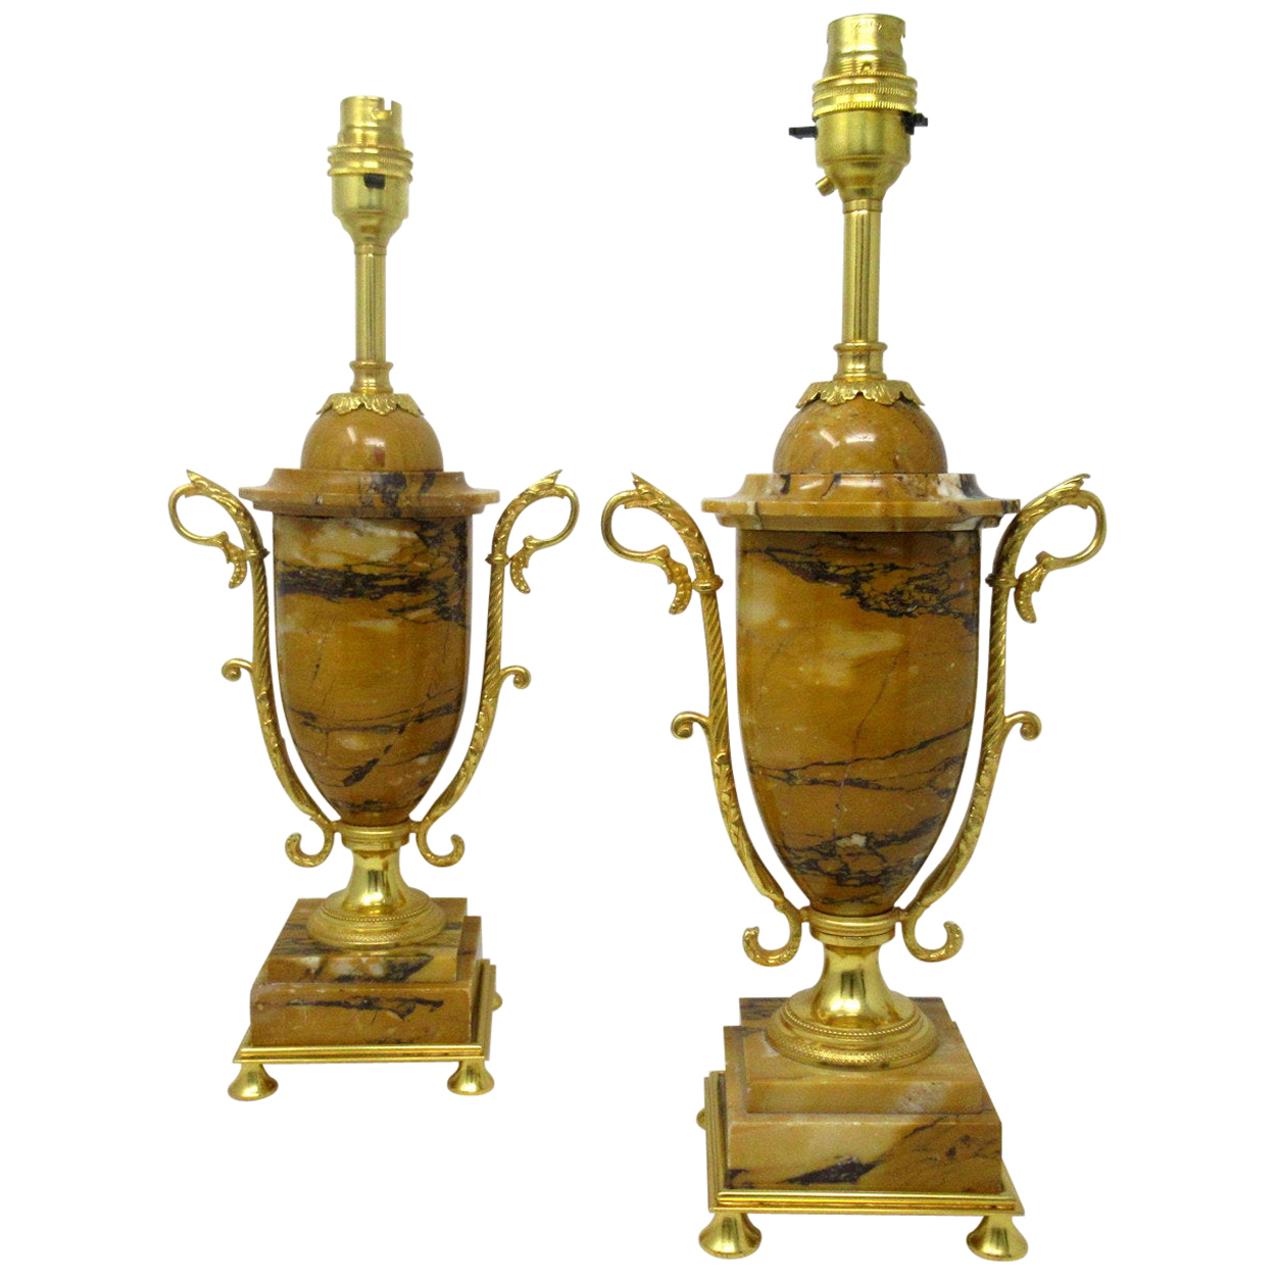 Pair of French Giallo Sienna Marble Gilt Bronze Ormolu Electric Table Lamps